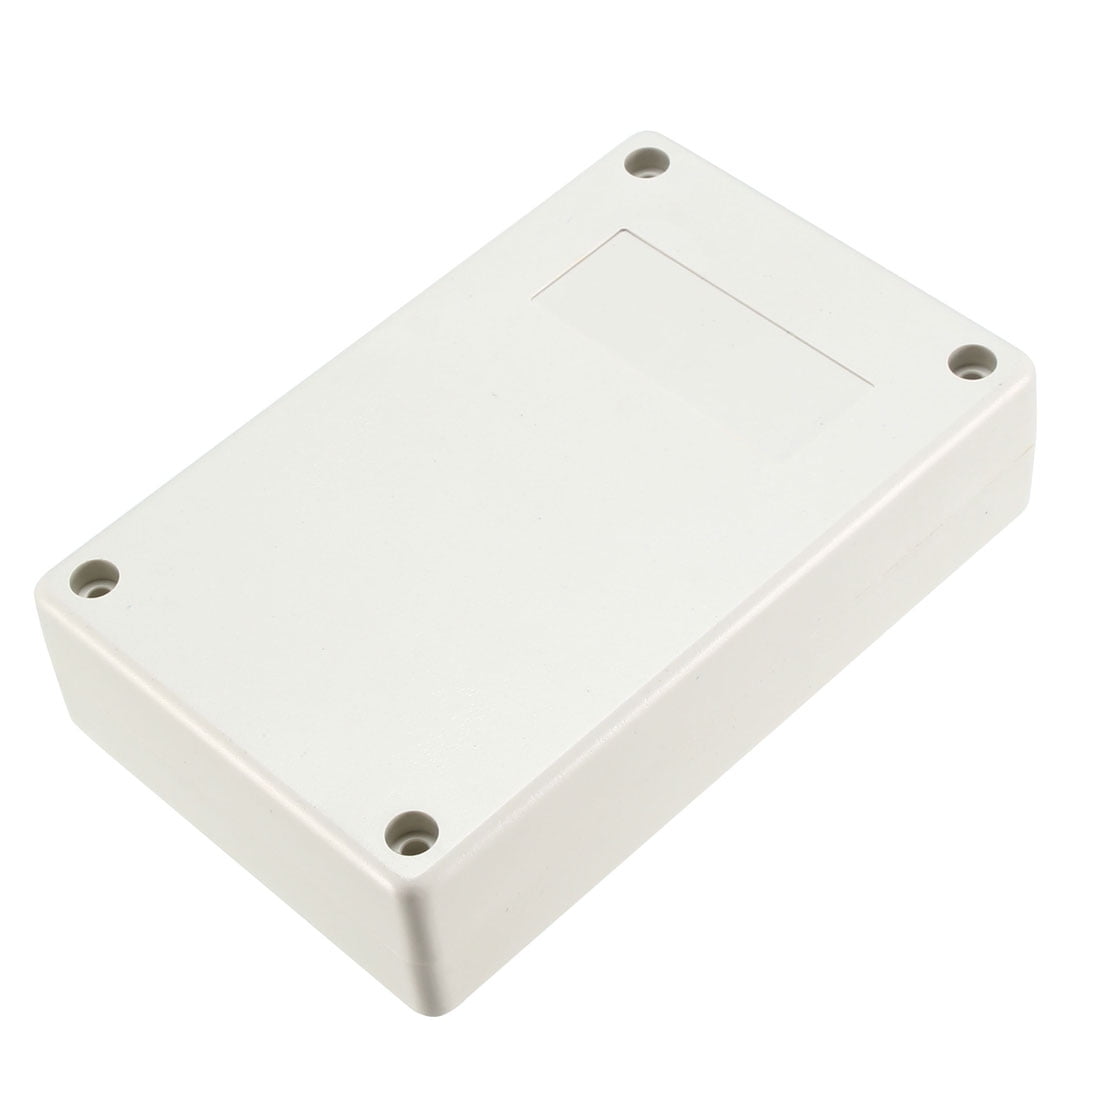 uxcell® 125 x 80 x 32mm Electronic Plastic DIY Junction Box Enclosure Case White 